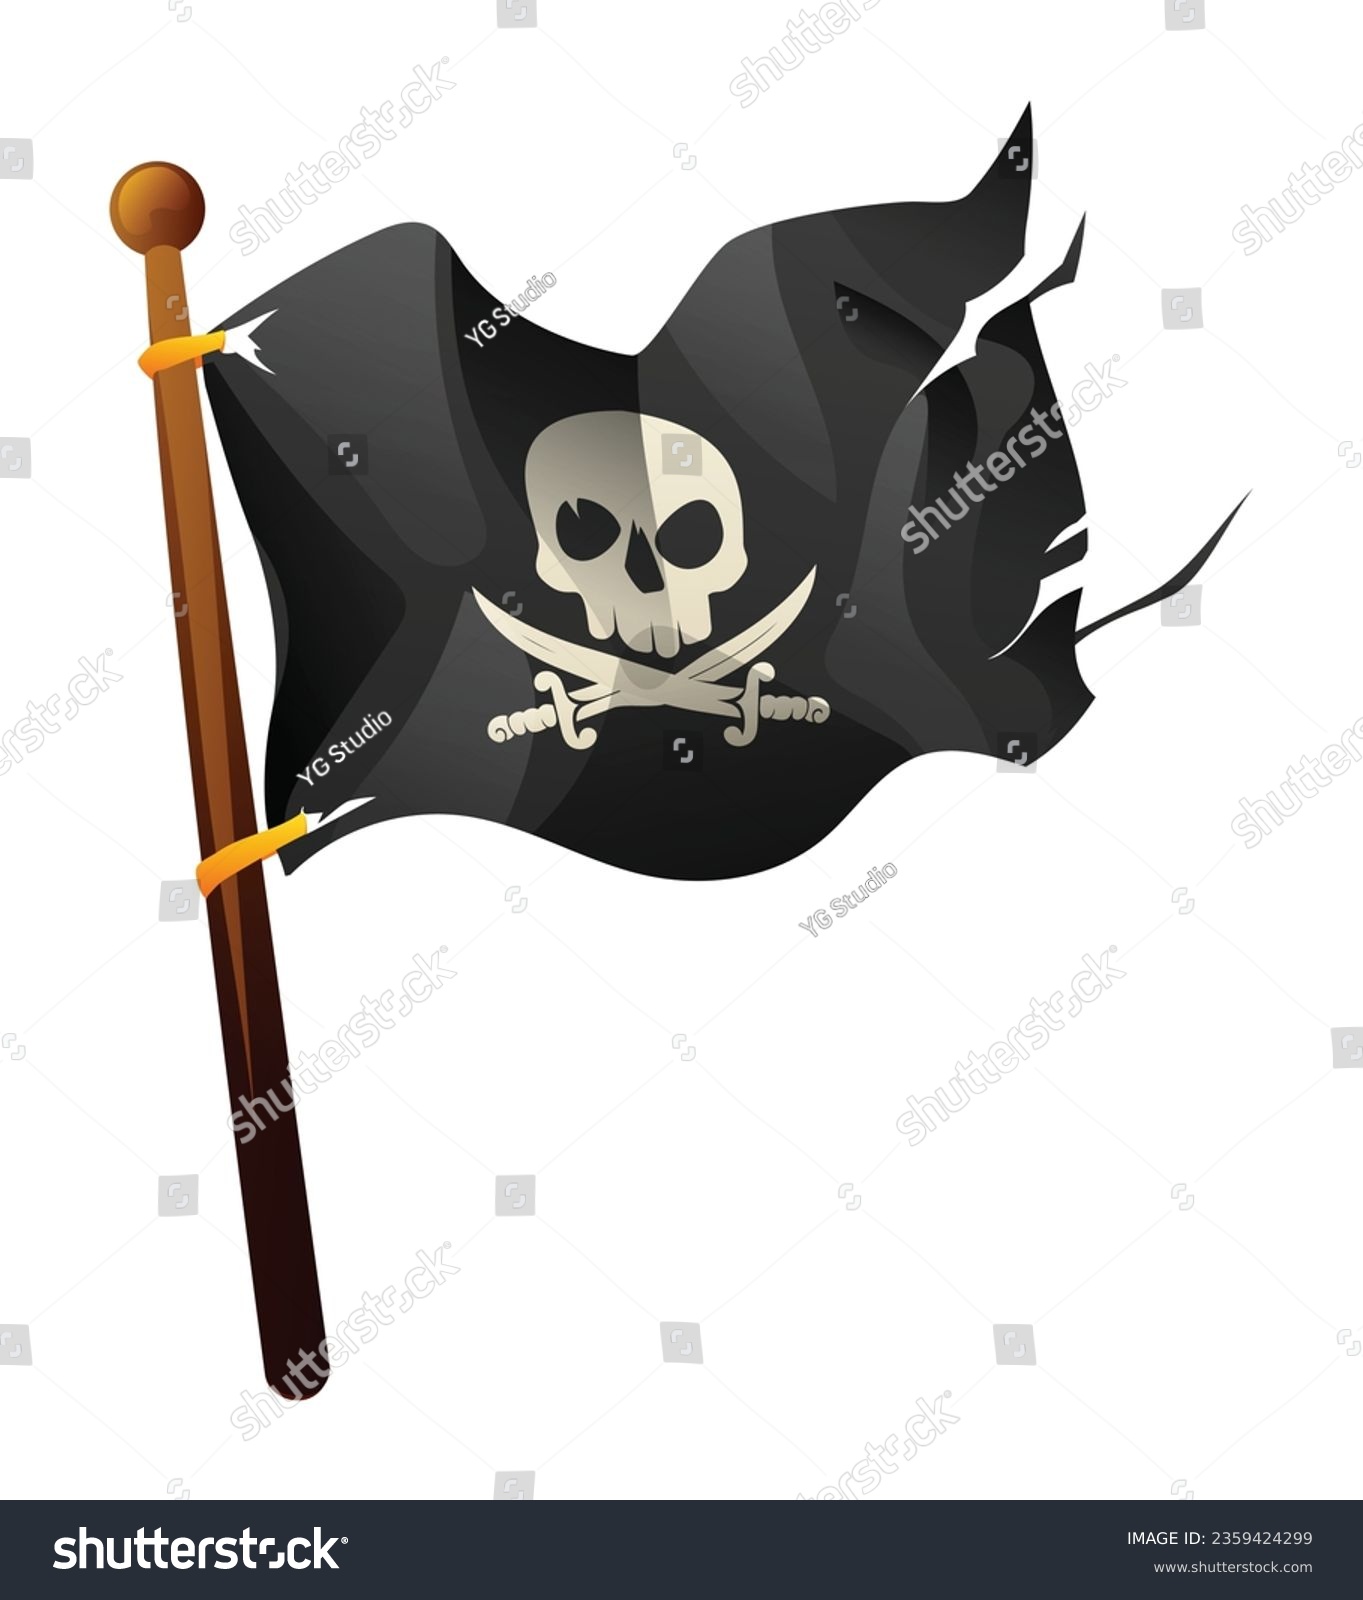 SVG of Pirate flag with skull and crossbones. Tattered pirate flag vector cartoon illustration svg